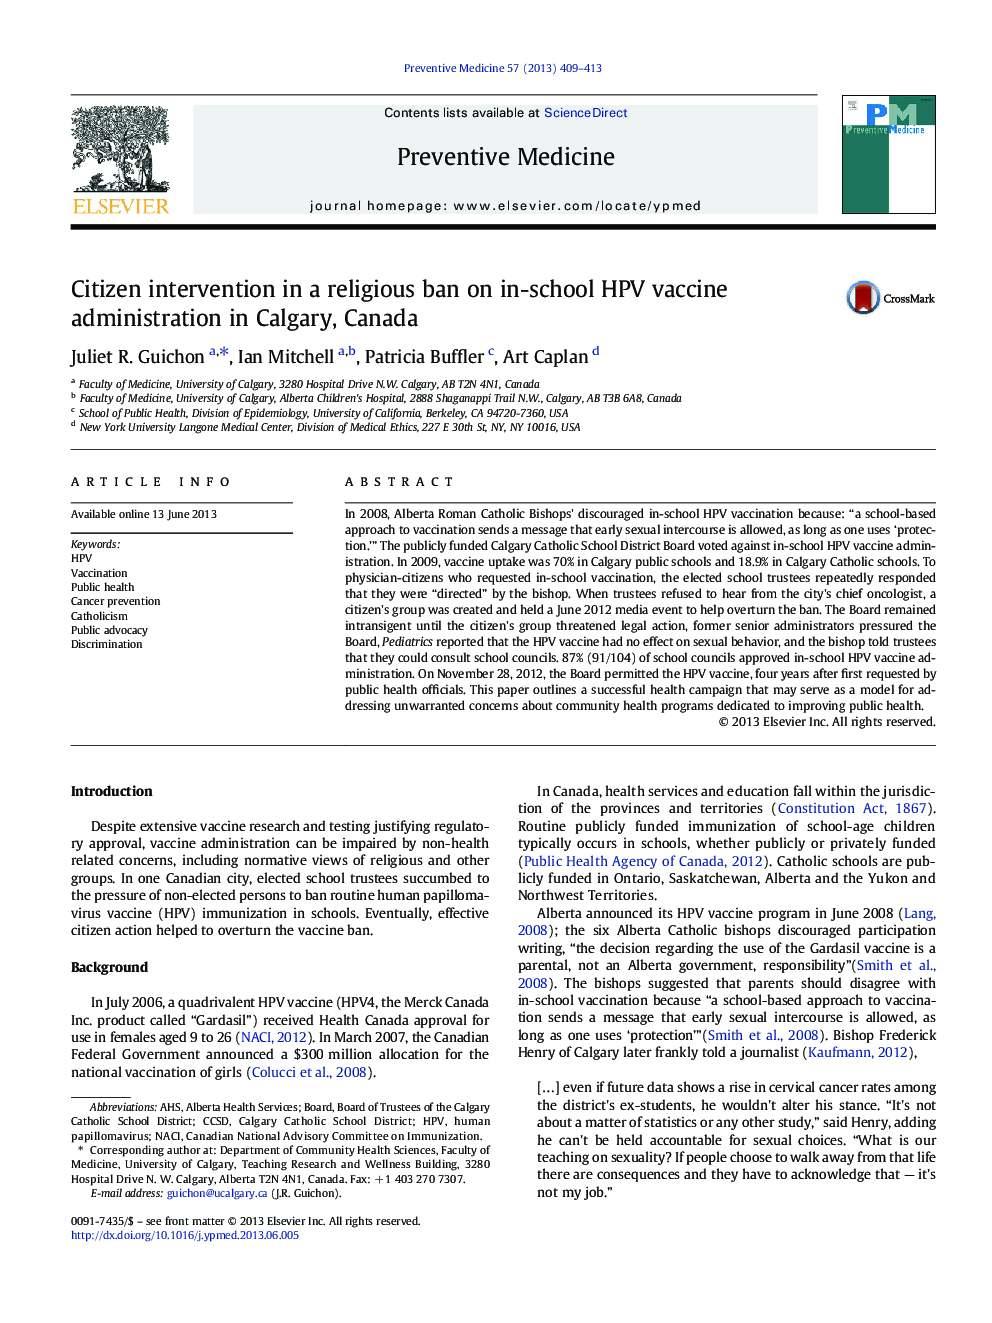 Citizen intervention in a religious ban on in-school HPV vaccine administration in Calgary, Canada